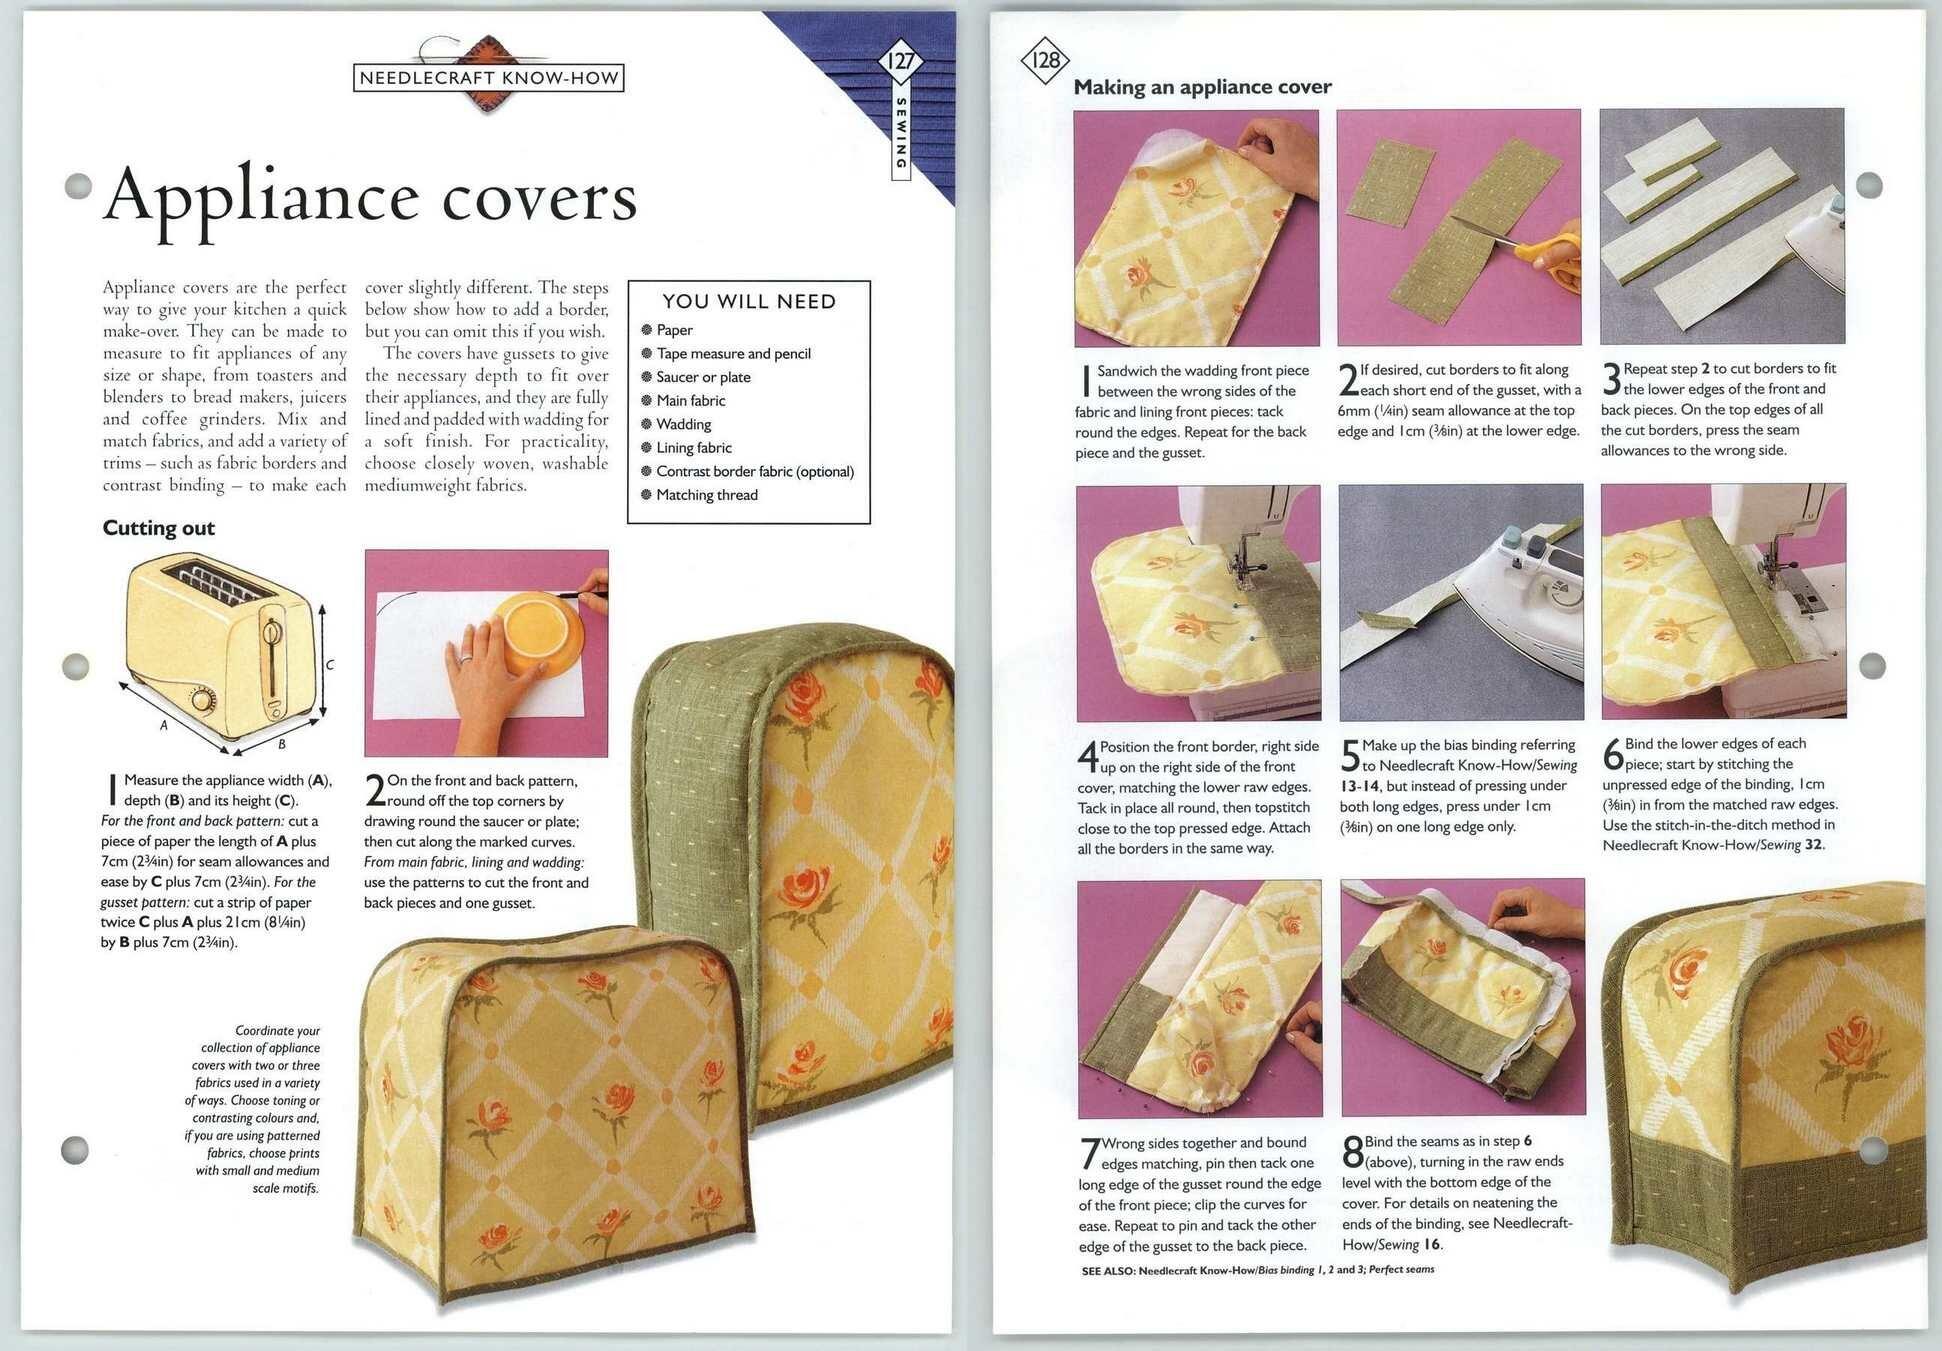 Appliance Covers #127-128 Know-How Sewing - Needlecraft Magic Pattern